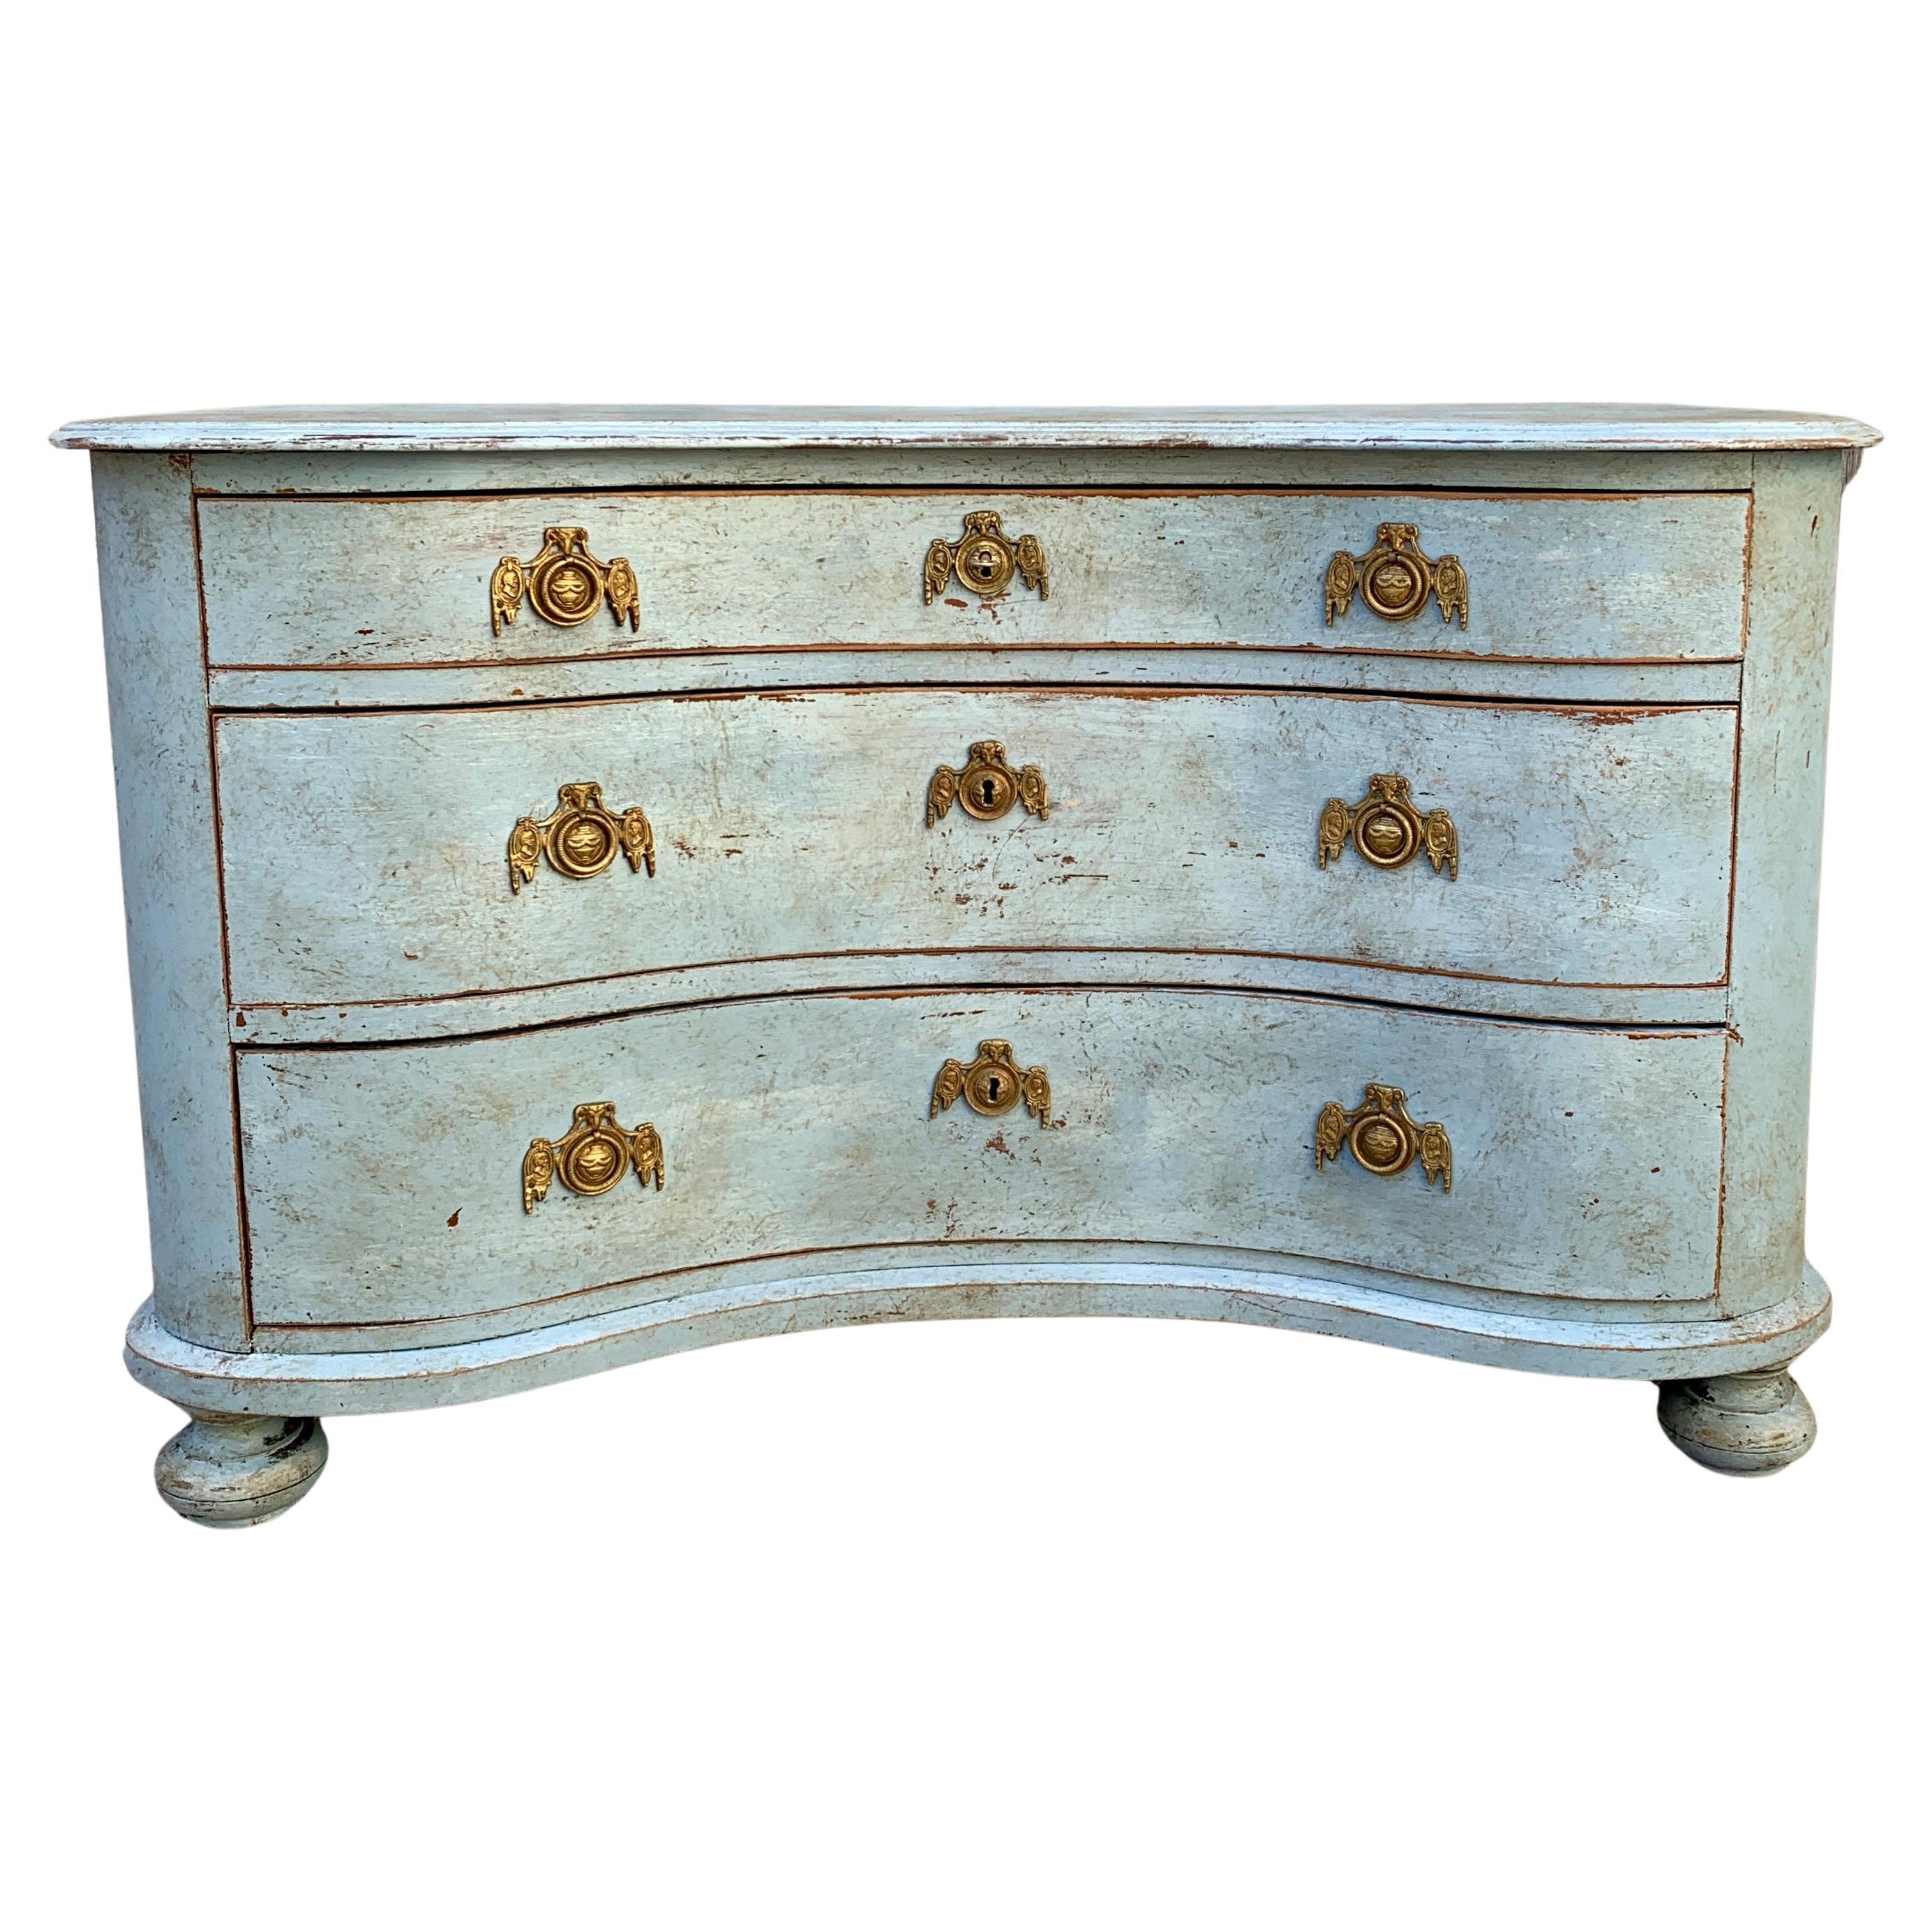 Late 19th Gustavian style 3 drawer dresser, Sweden.
The chest of drawers has later super charming Gustavian blue hand painting finish and grat looking brass hardware.
The drawers work smoothly and the chest has not bad scents etc.
 